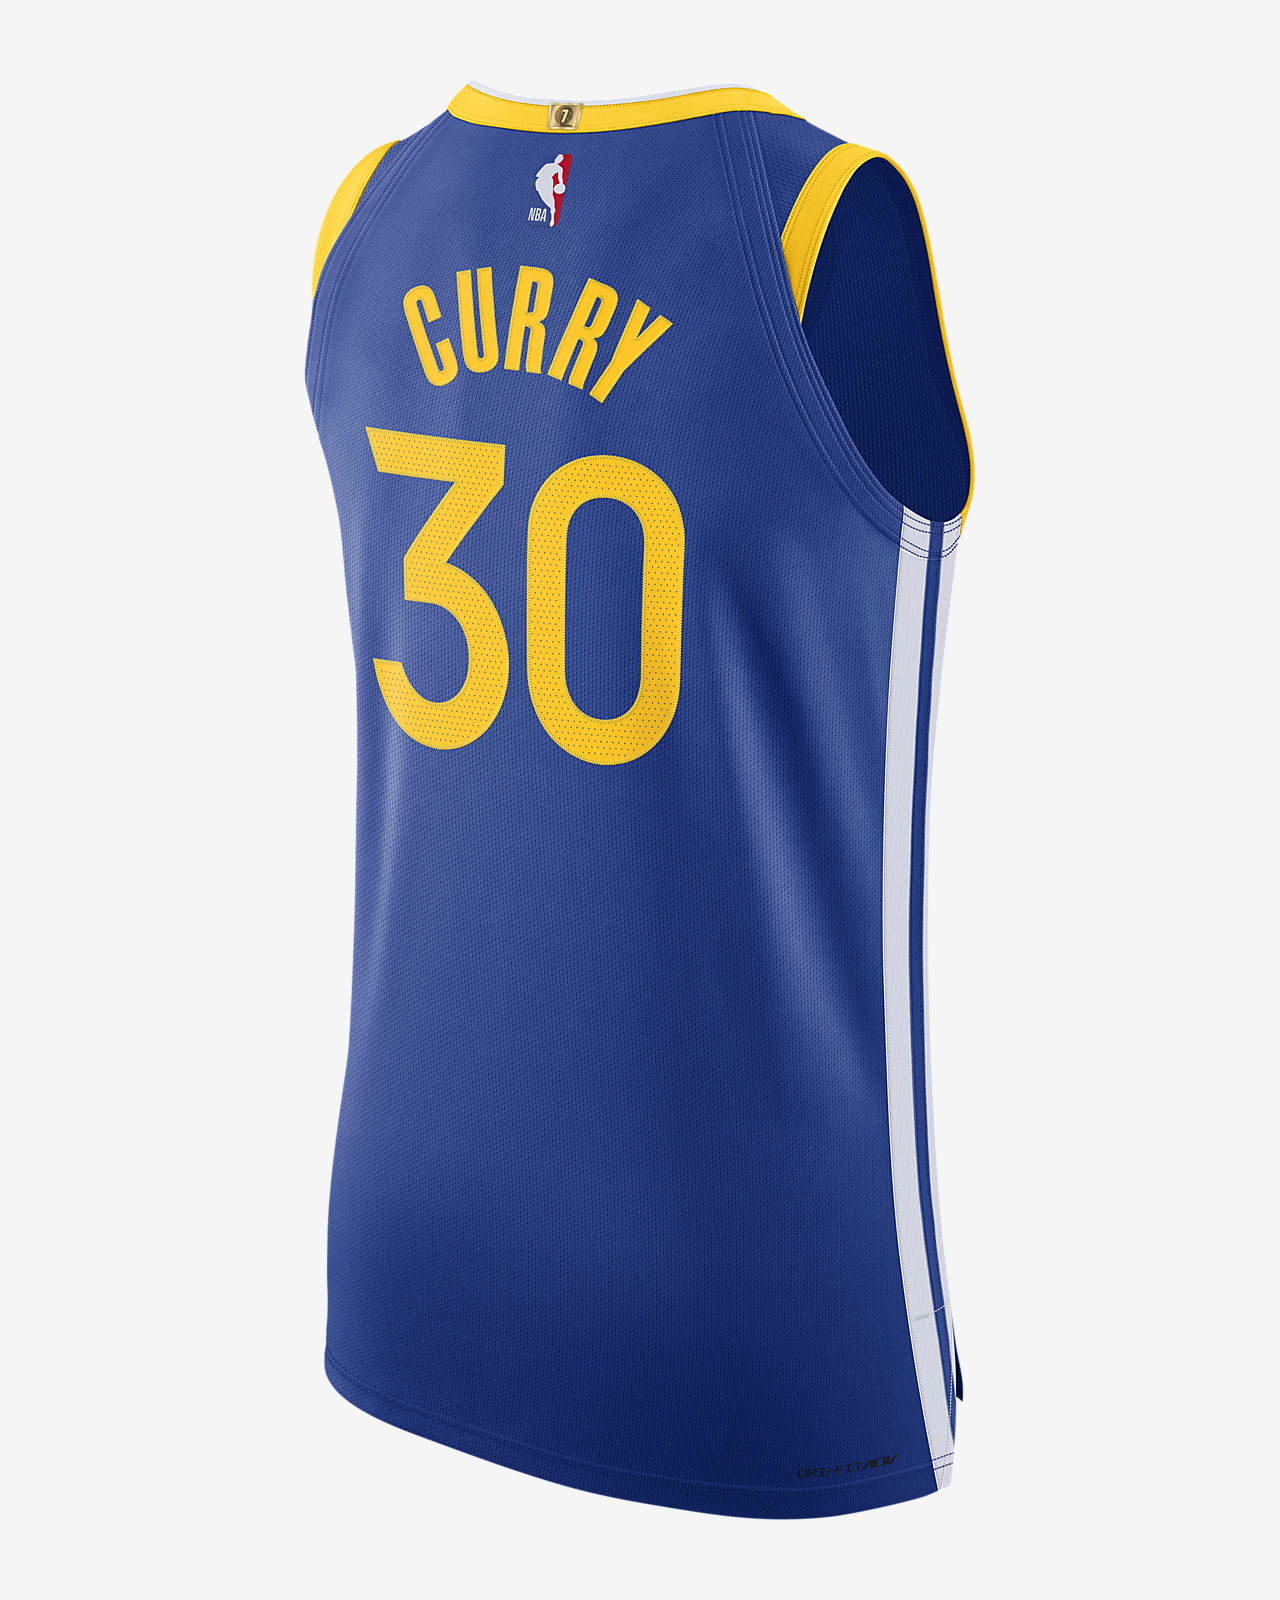 authentic curry jersey